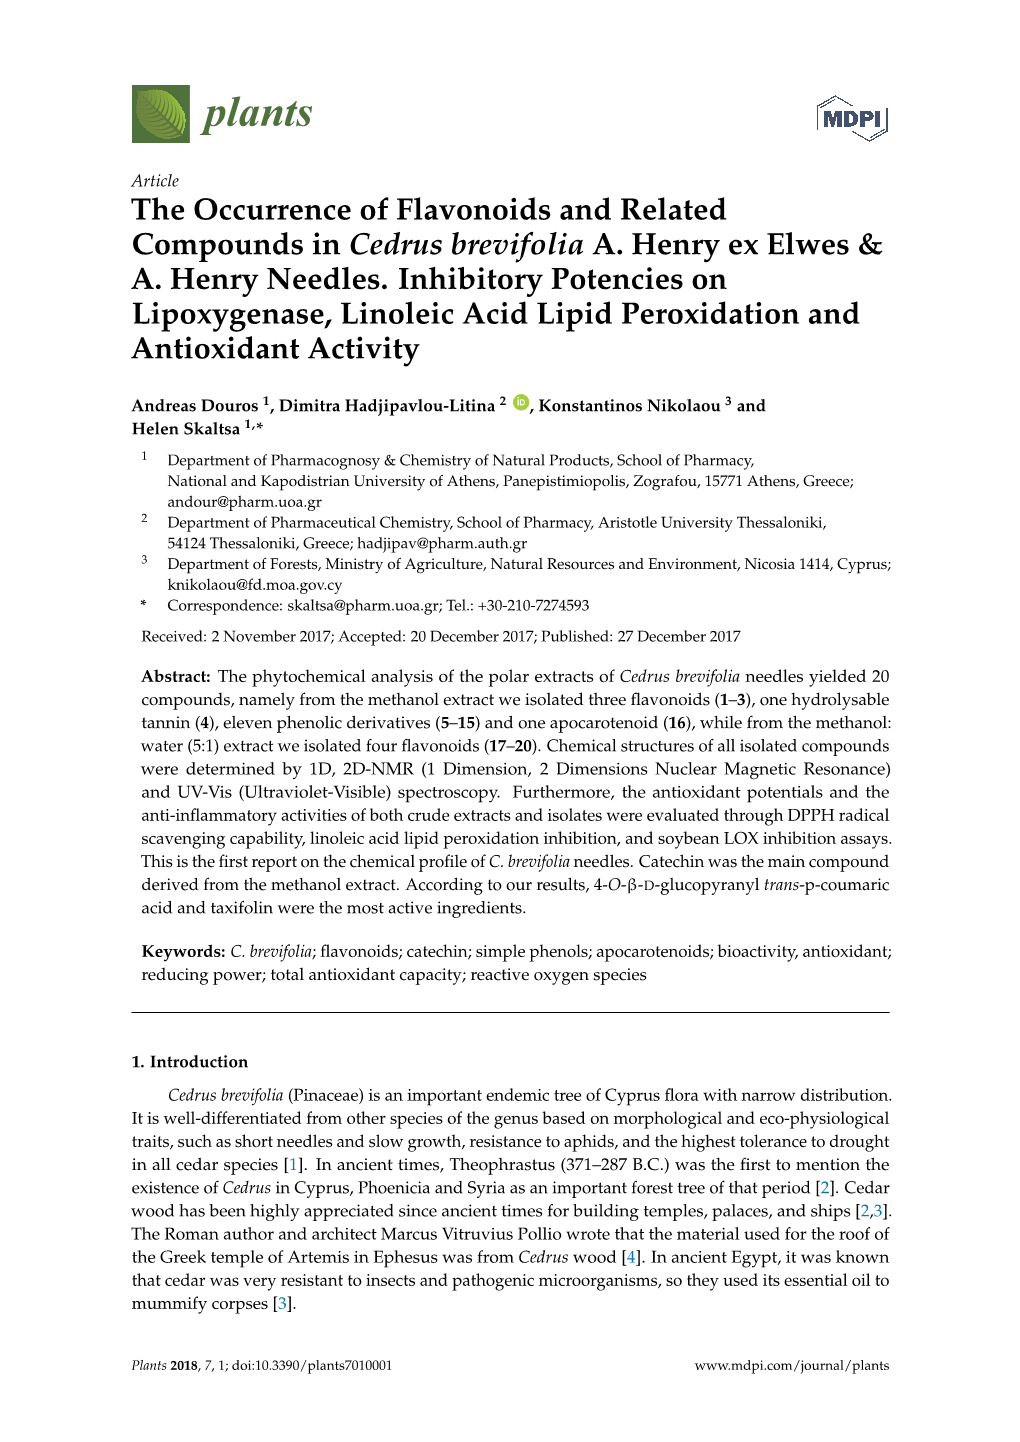 The Occurrence of Flavonoids and Related Compounds in Cedrus Brevifolia A